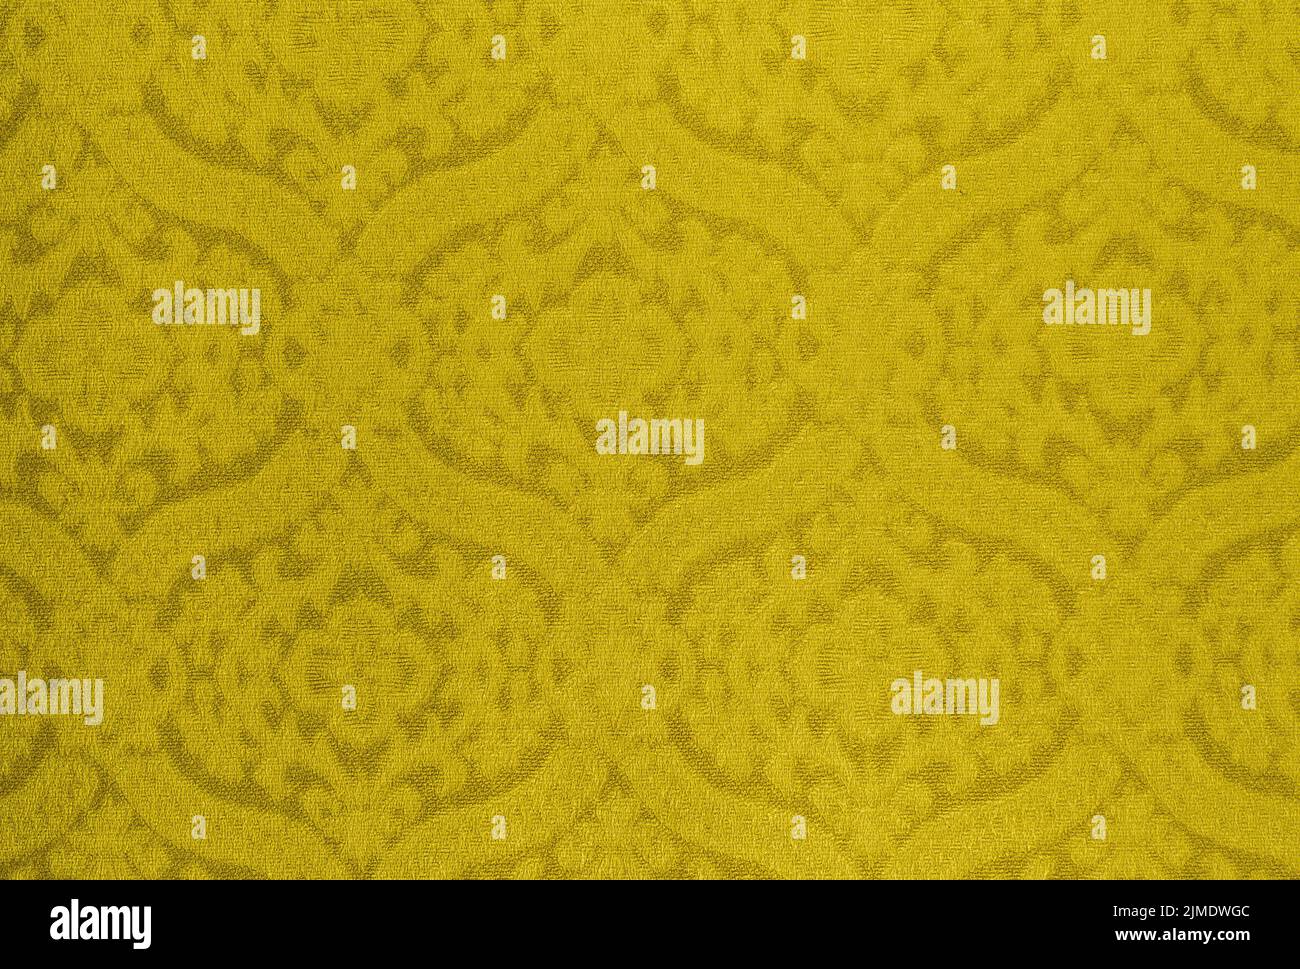 Vintage Fashionable Fabric Wallpaper or Textile Texture Stock Photo